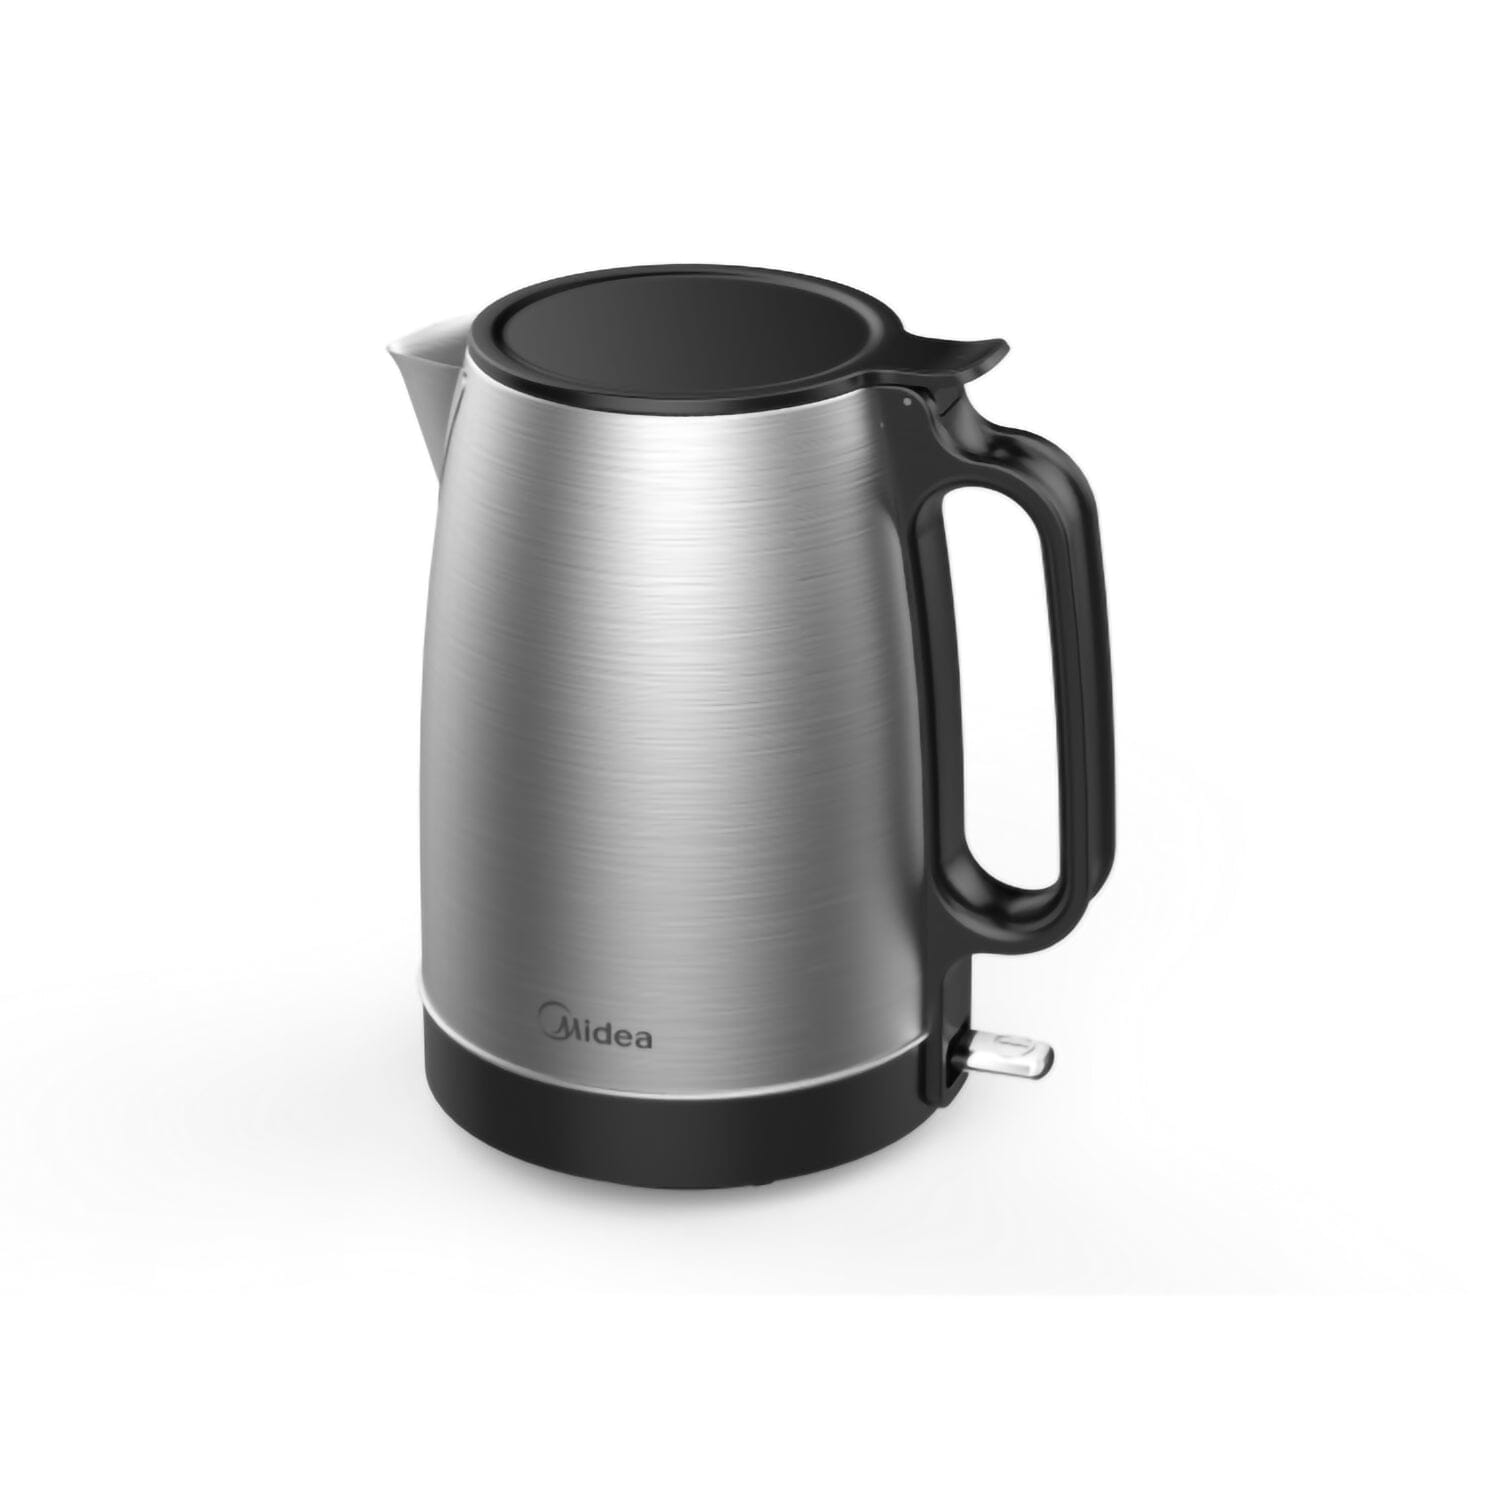 Midea 1.7L Fast Boiling Electric Kettle,Stainless Steel Grey,MK-1703M ONE2WORLD 